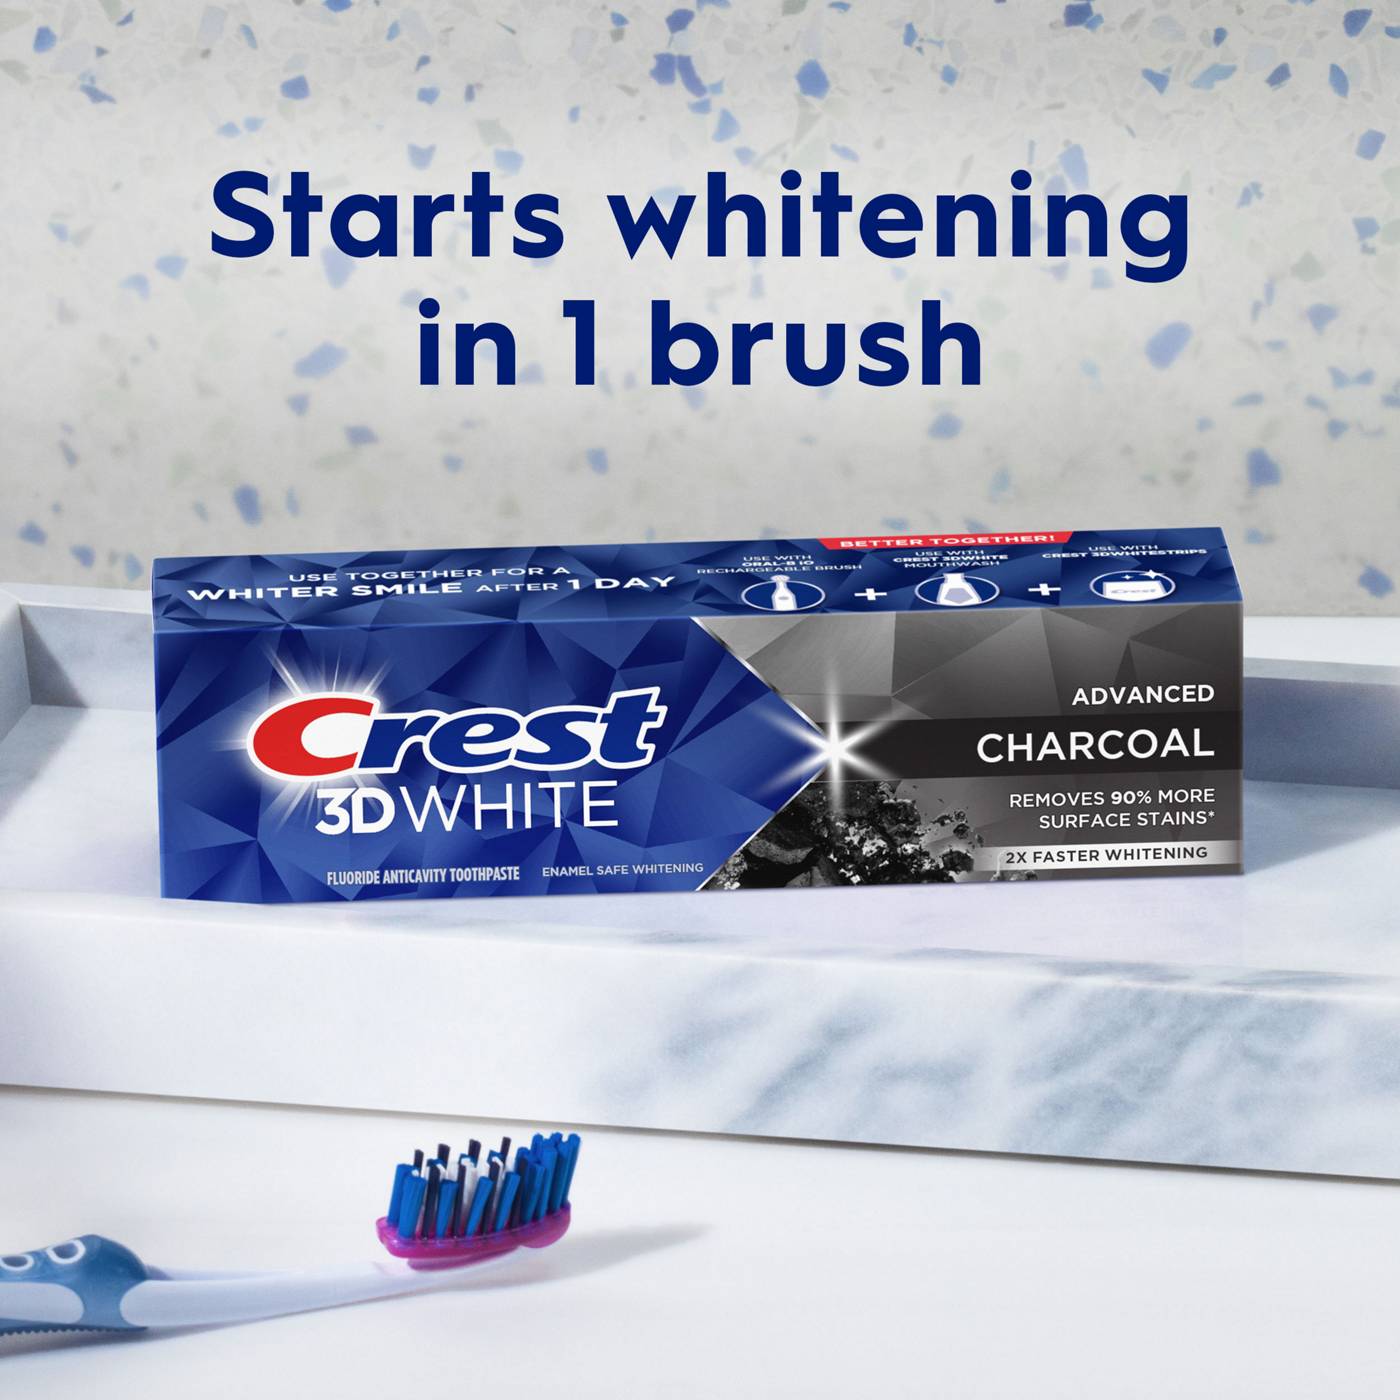 Crest 3D White Whitening Toothpaste - Charcoal; image 3 of 7